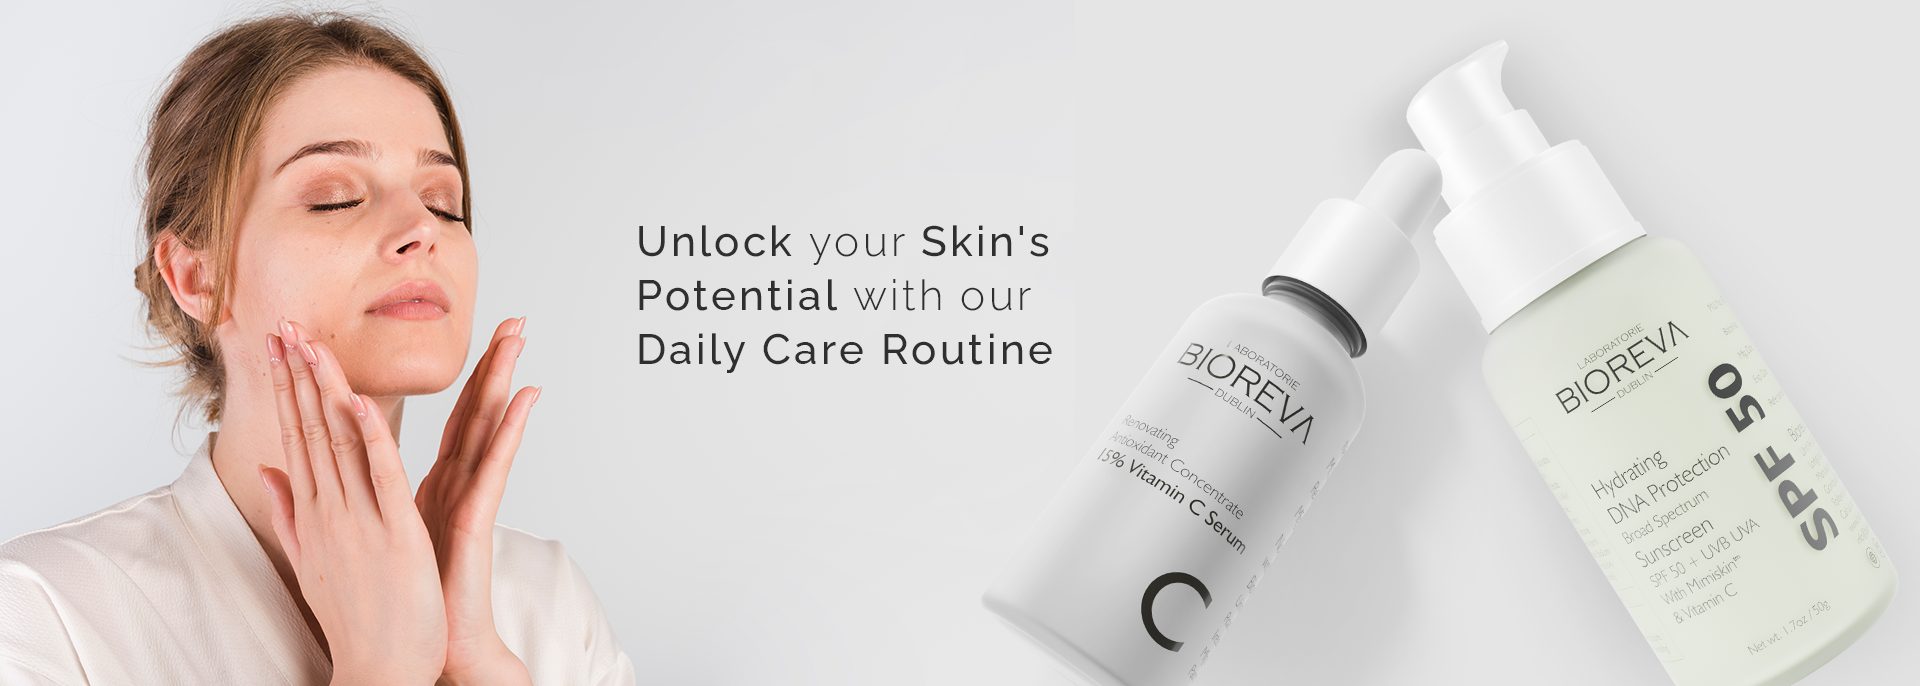 Daily Skincare Routine Banner